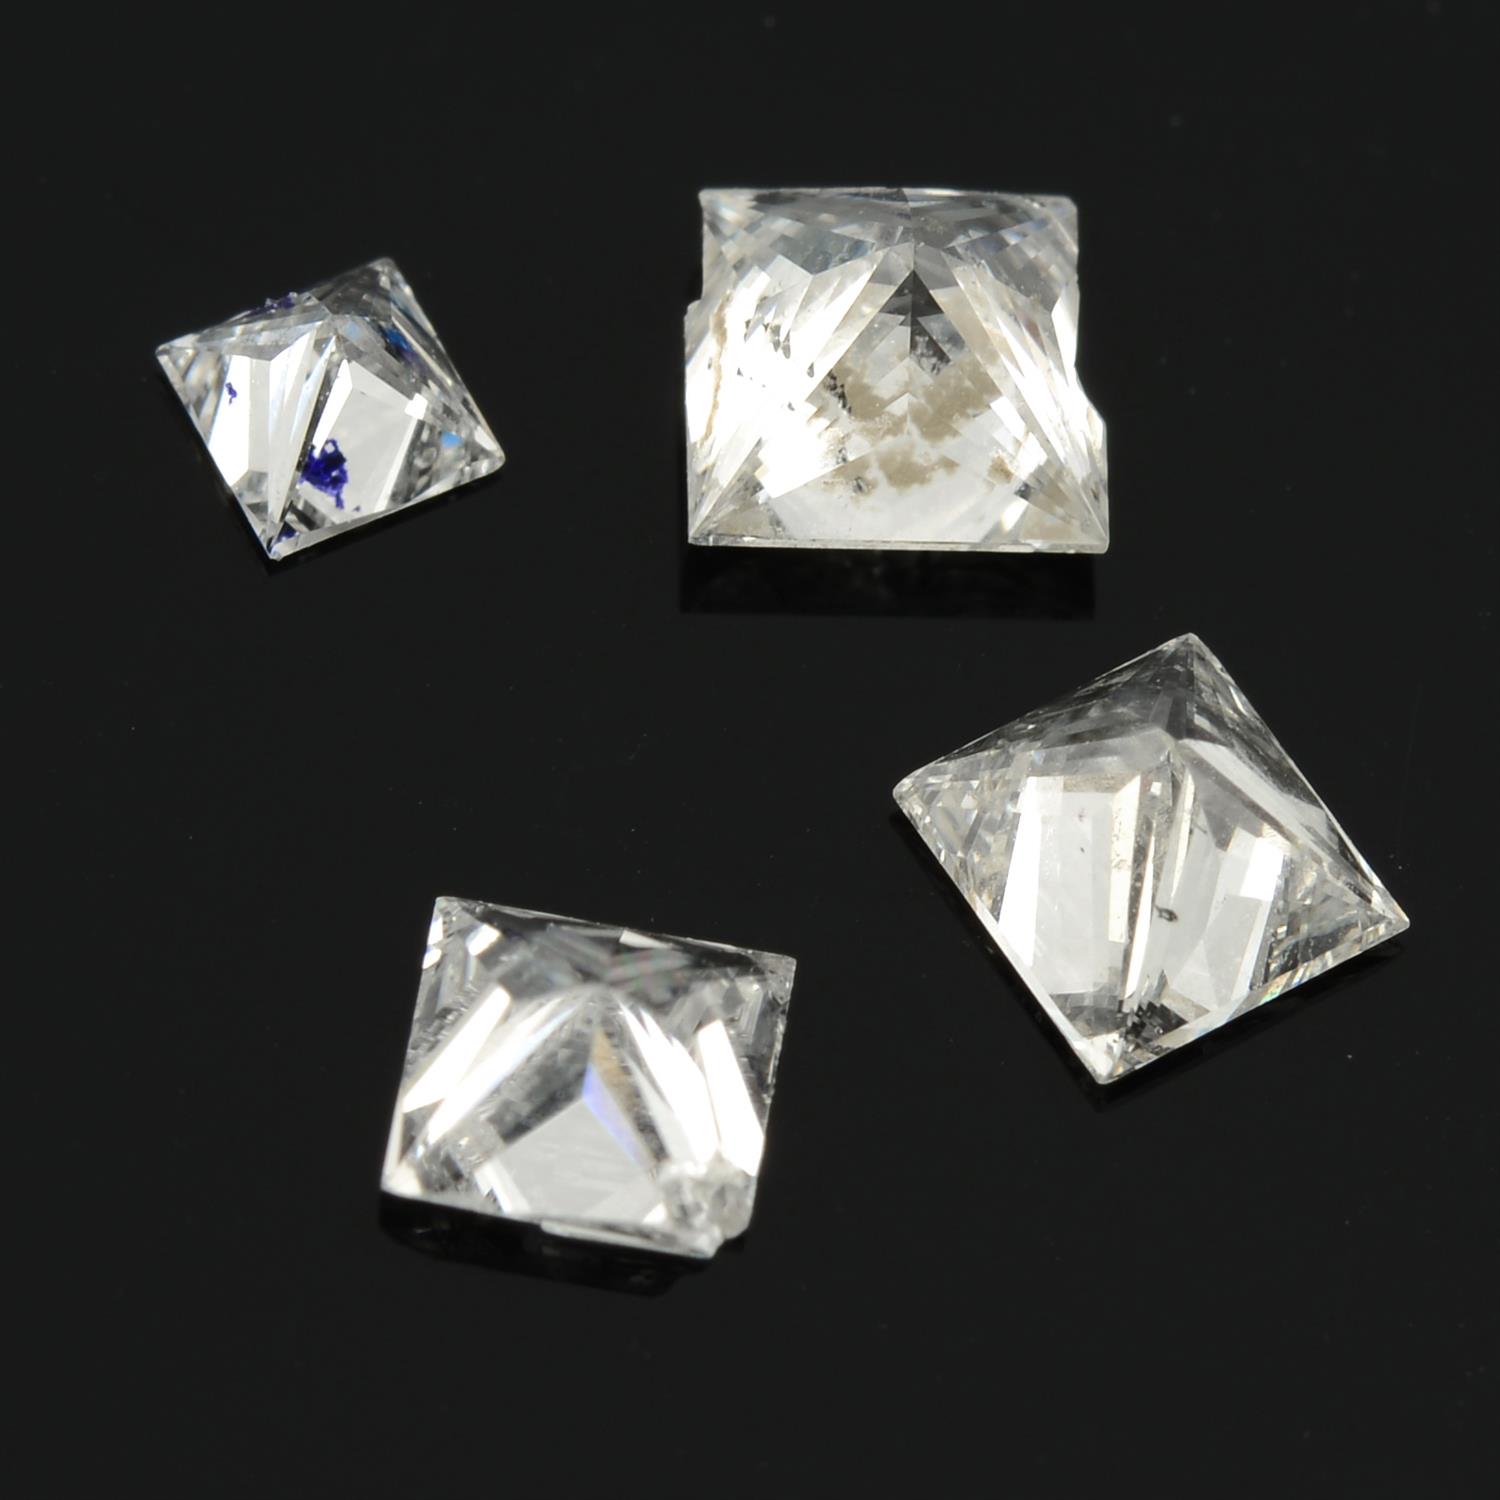 Four square shape diamonds, estimated total weight 1.28cts. - Image 2 of 2